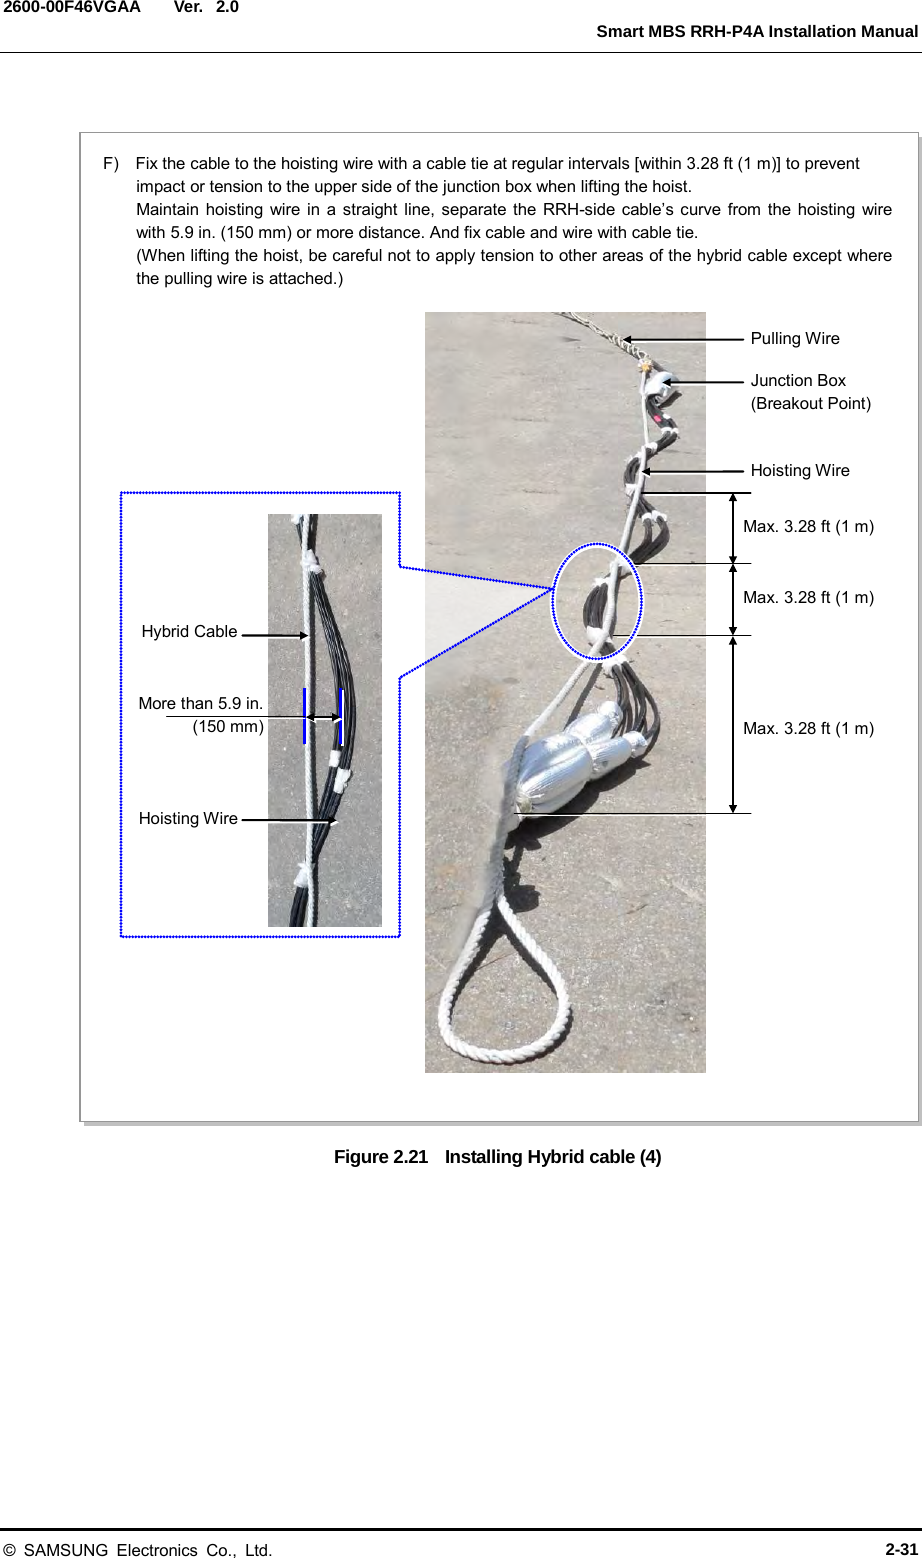  Ver.   Smart MBS RRH-P4A Installation Manual 2600-00F46VGAA 2.0  Figure 2.21   Installing Hybrid cable (4) F)  Fix the cable to the hoisting wire with a cable tie at regular intervals [within 3.28 ft (1 m)] to prevent impact or tension to the upper side of the junction box when lifting the hoist. Maintain hoisting wire in a straight line, separate the RRH-side cable’s curve from the hoisting wire with 5.9 in. (150 mm) or more distance. And fix cable and wire with cable tie. (When lifting the hoist, be careful not to apply tension to other areas of the hybrid cable except where the pulling wire is attached.) Max. 3.28 ft (1 m) Junction Box (Breakout Point)  Pulling Wire Hoisting Wire Max. 3.28 ft (1 m) Max. 3.28 ft (1 m)  Hoisting Wire Hybrid Cable More than 5.9 in.   (150 mm) © SAMSUNG Electronics Co., Ltd. 2-31 